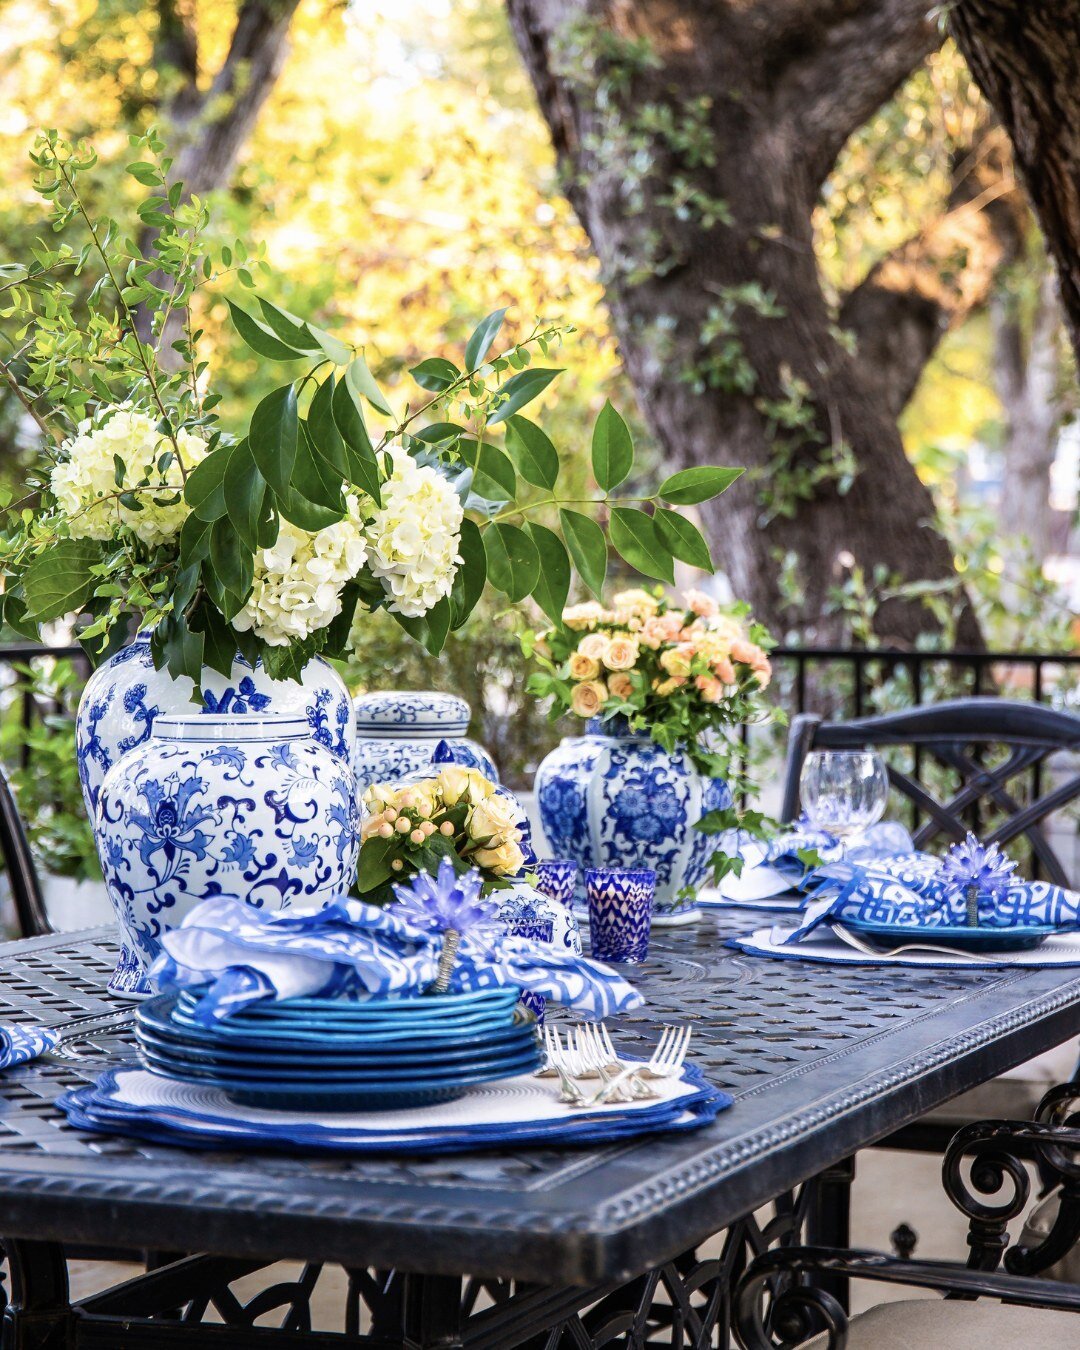 Special things are only special if you use them! 🌟🌟🌟

That&rsquo;s one reason to bring the nice dinnerware outside - that extra touch of magic turns an ordinary experience into something extraordinary! ✨🥂

How do you like to make nights more memo